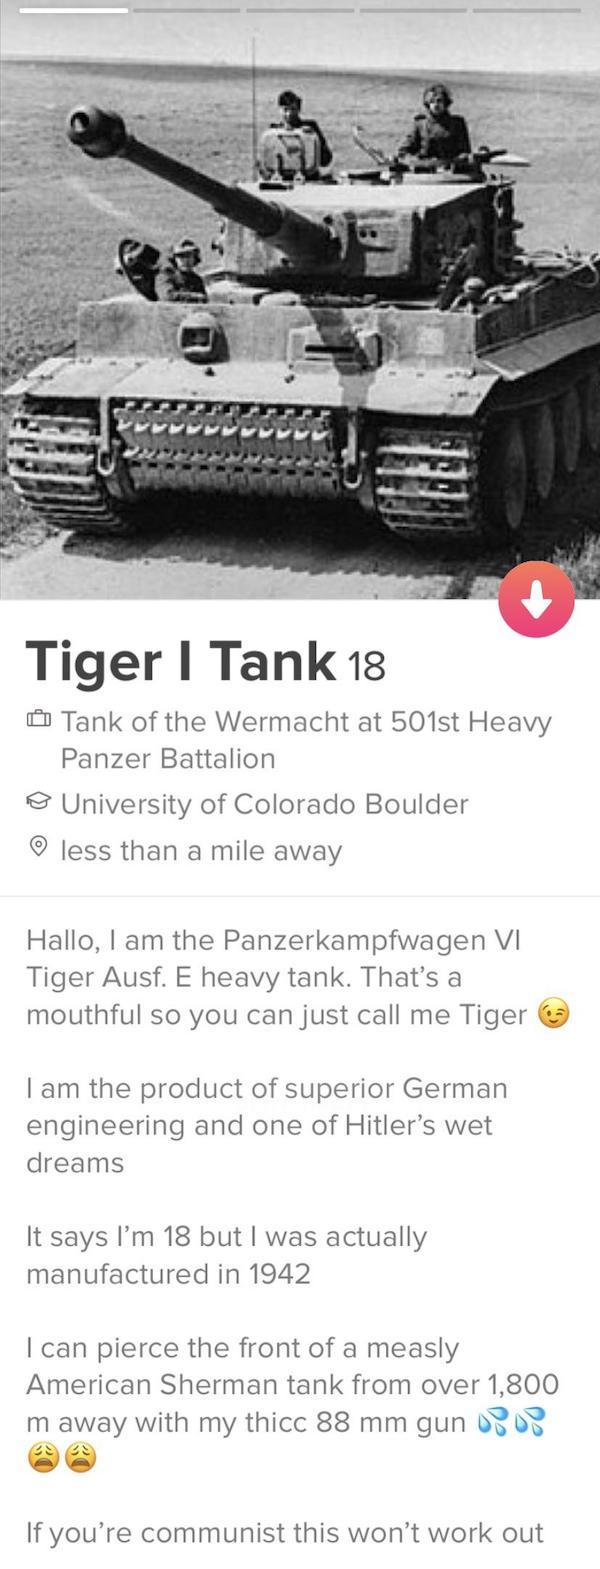 tinder - tiger tank tinder - Tiger | Tank 18 Tank of the Wermacht at 501st Heavy Panzer Battalion University of Colorado Boulder less than a mile away Hallo, I am the Panzerkampfwagen Vi Tiger Ausf. E heavy tank. That's a mouthful so you can just call me 